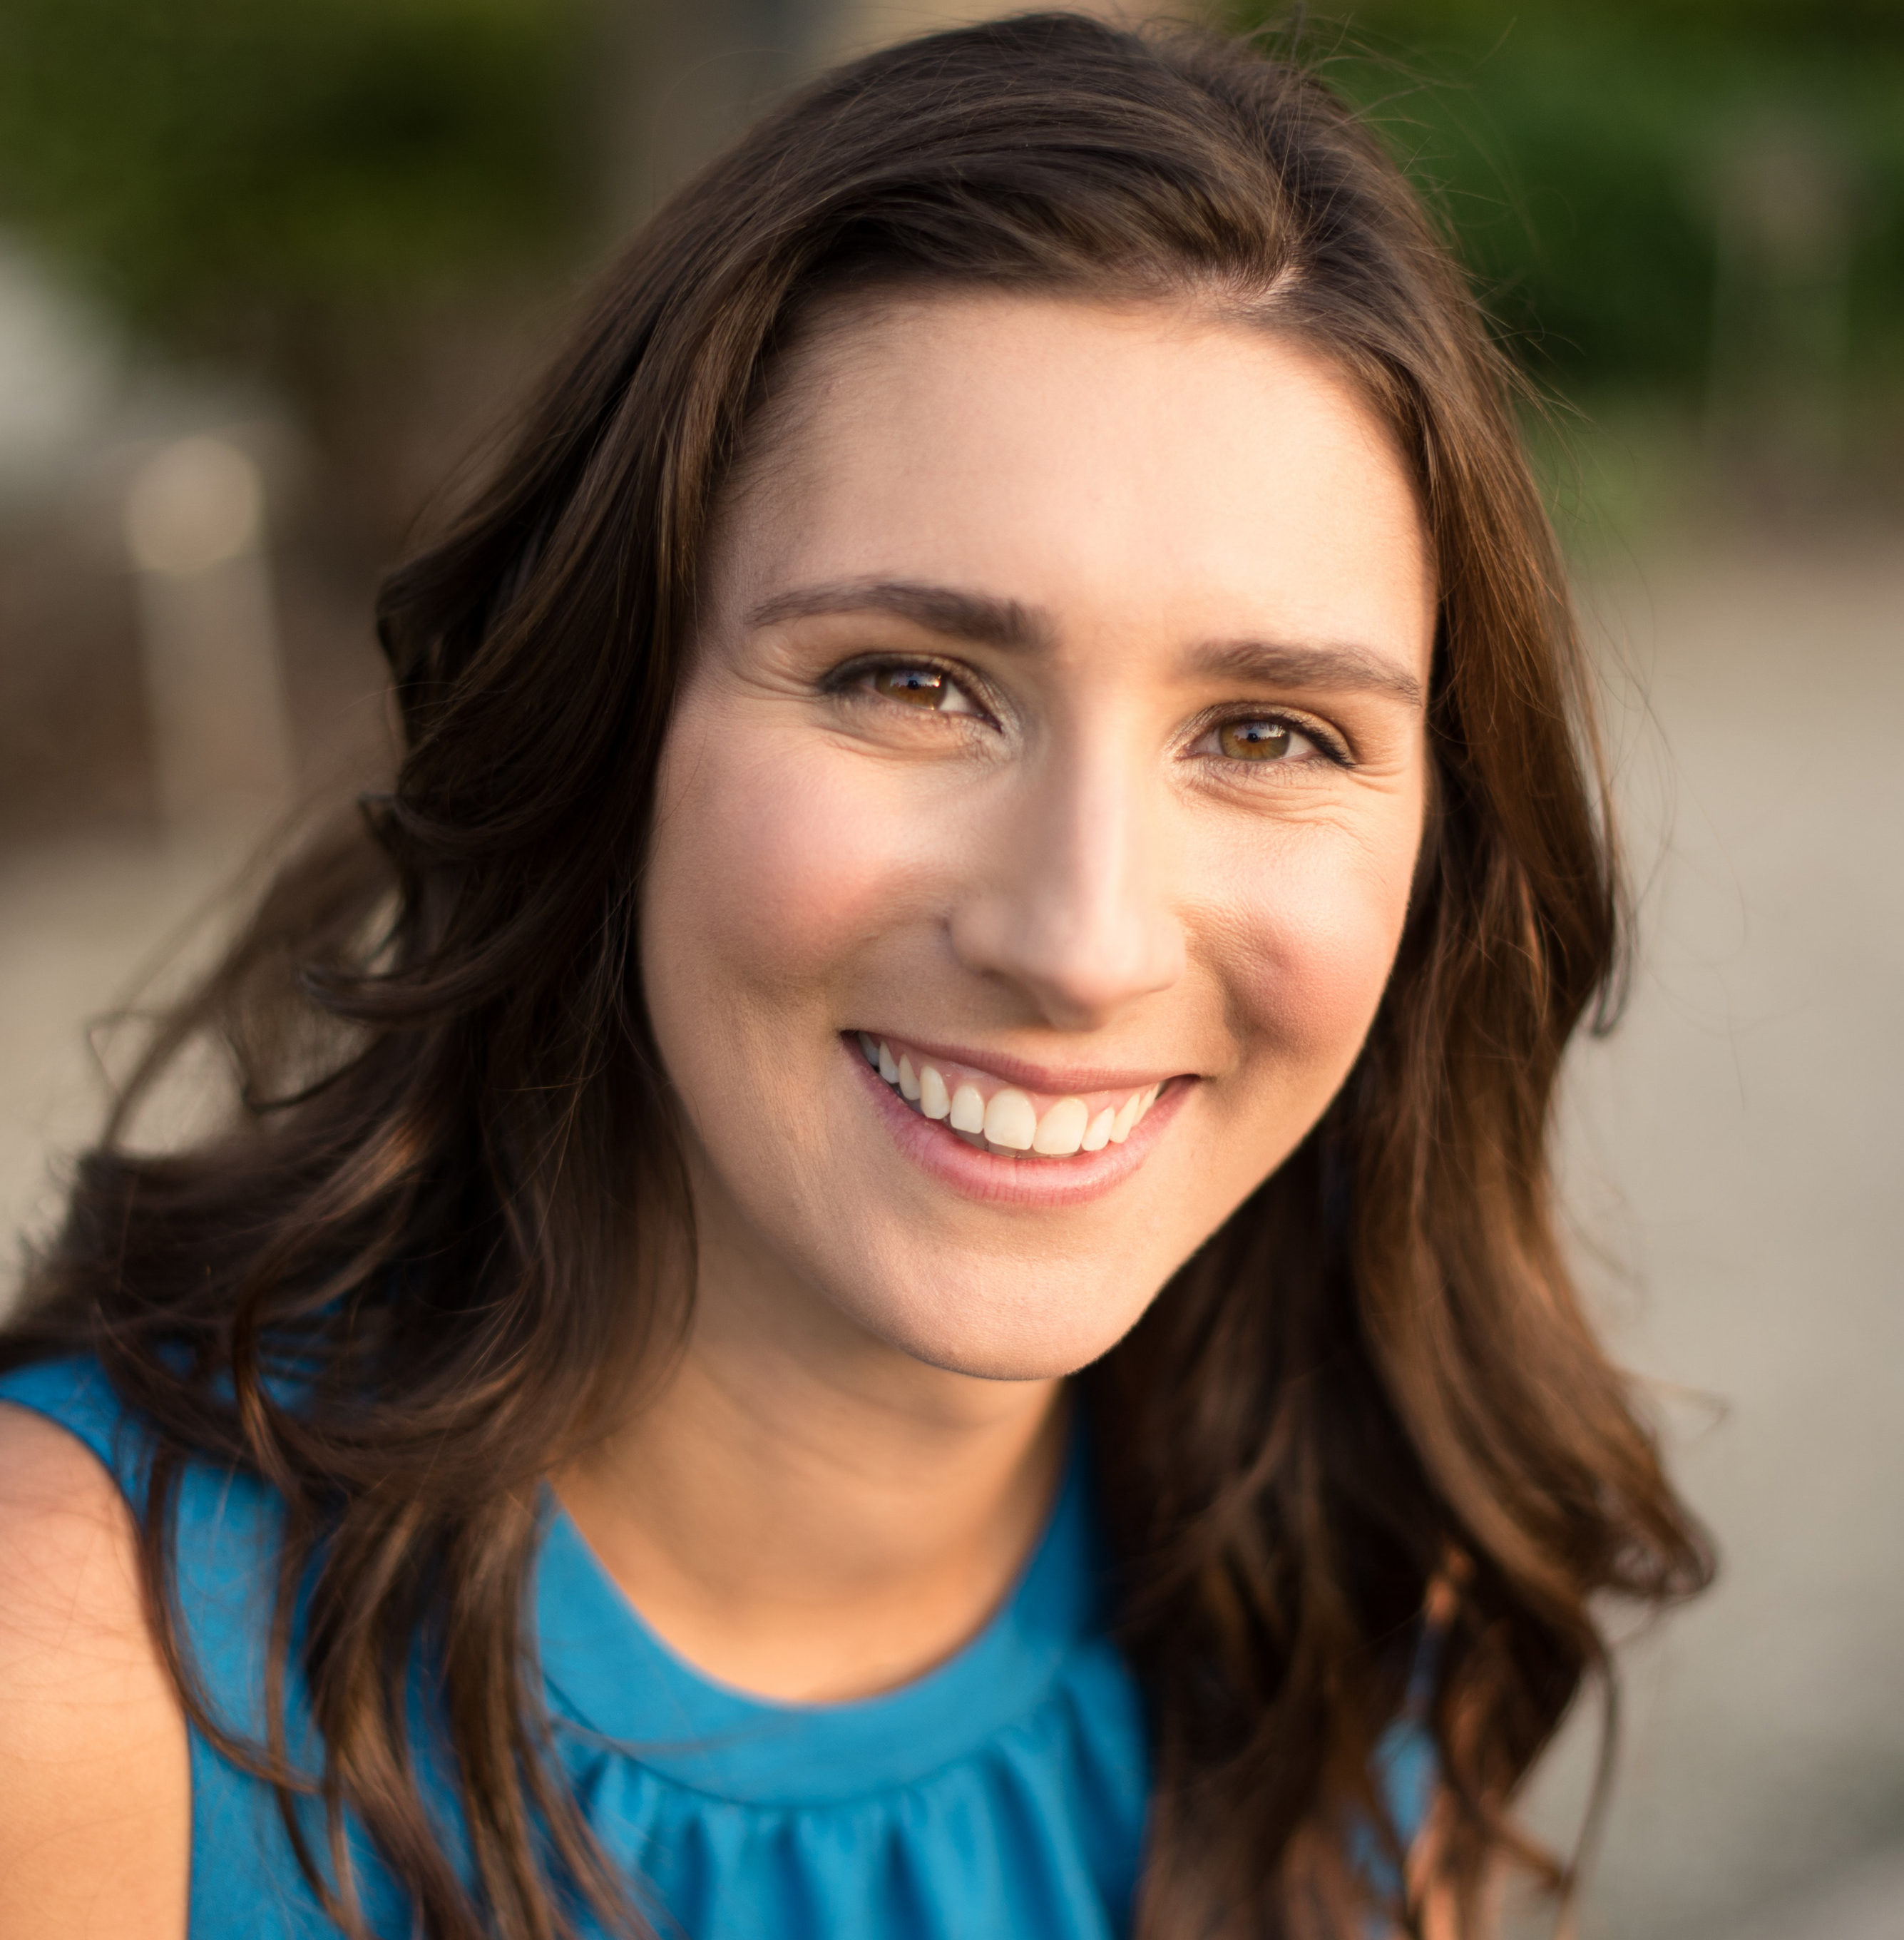 sexually exploited: Jenna Kreuzer (headshot), associate director for Wraparound Milwaukee, smiling woman with long brown hair in blue sleeveless top.